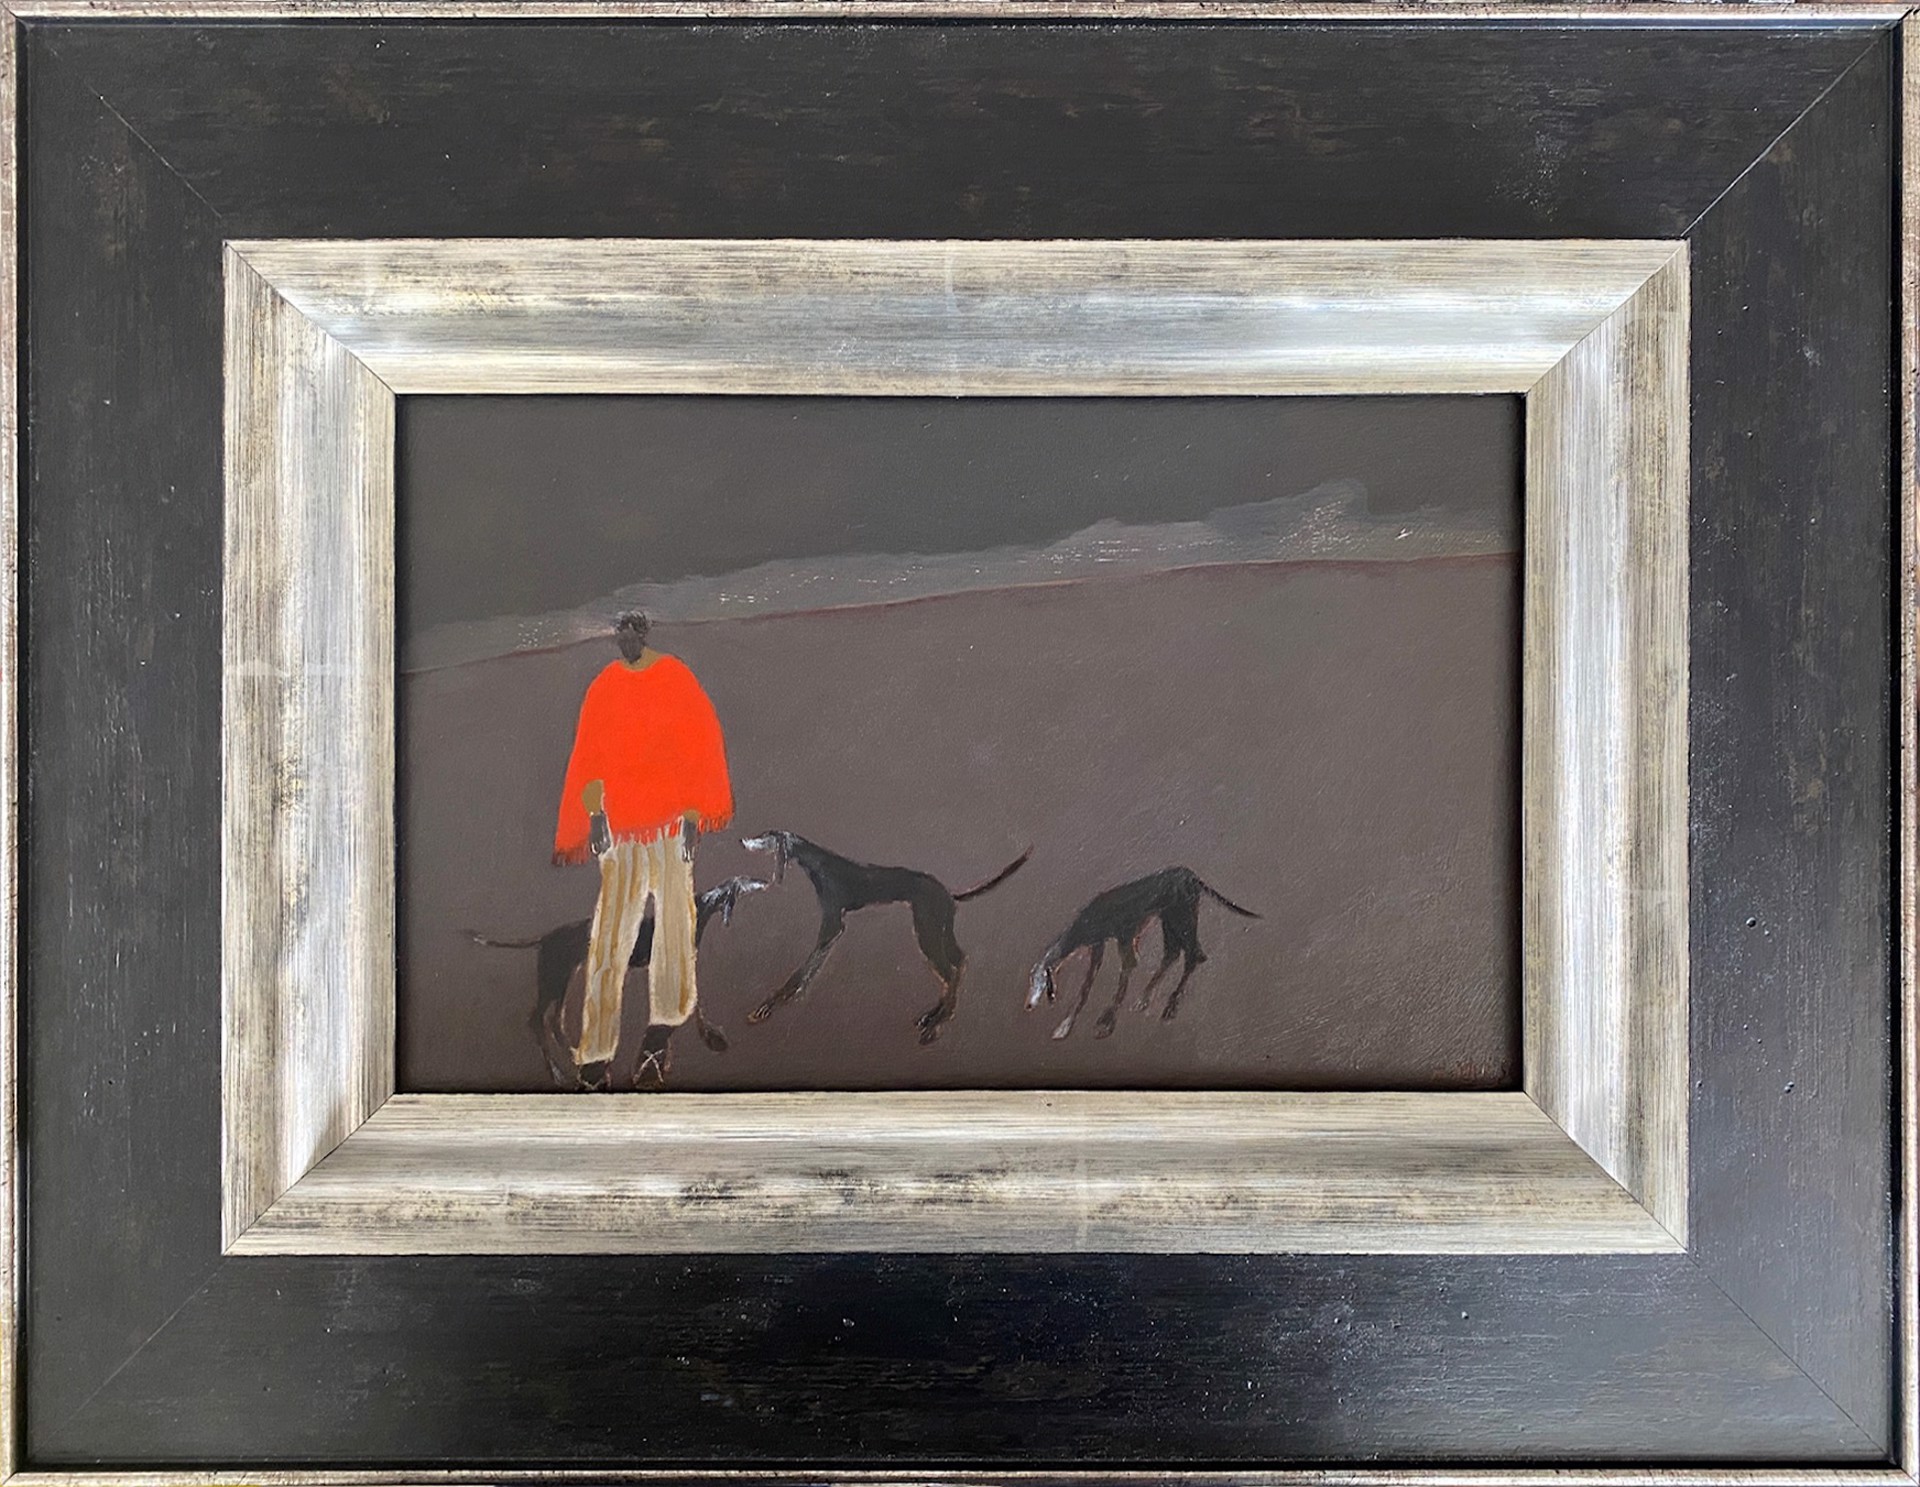 Calling The Hounds/Mexico/Red Poncho and Shoreline by Gigi Mills